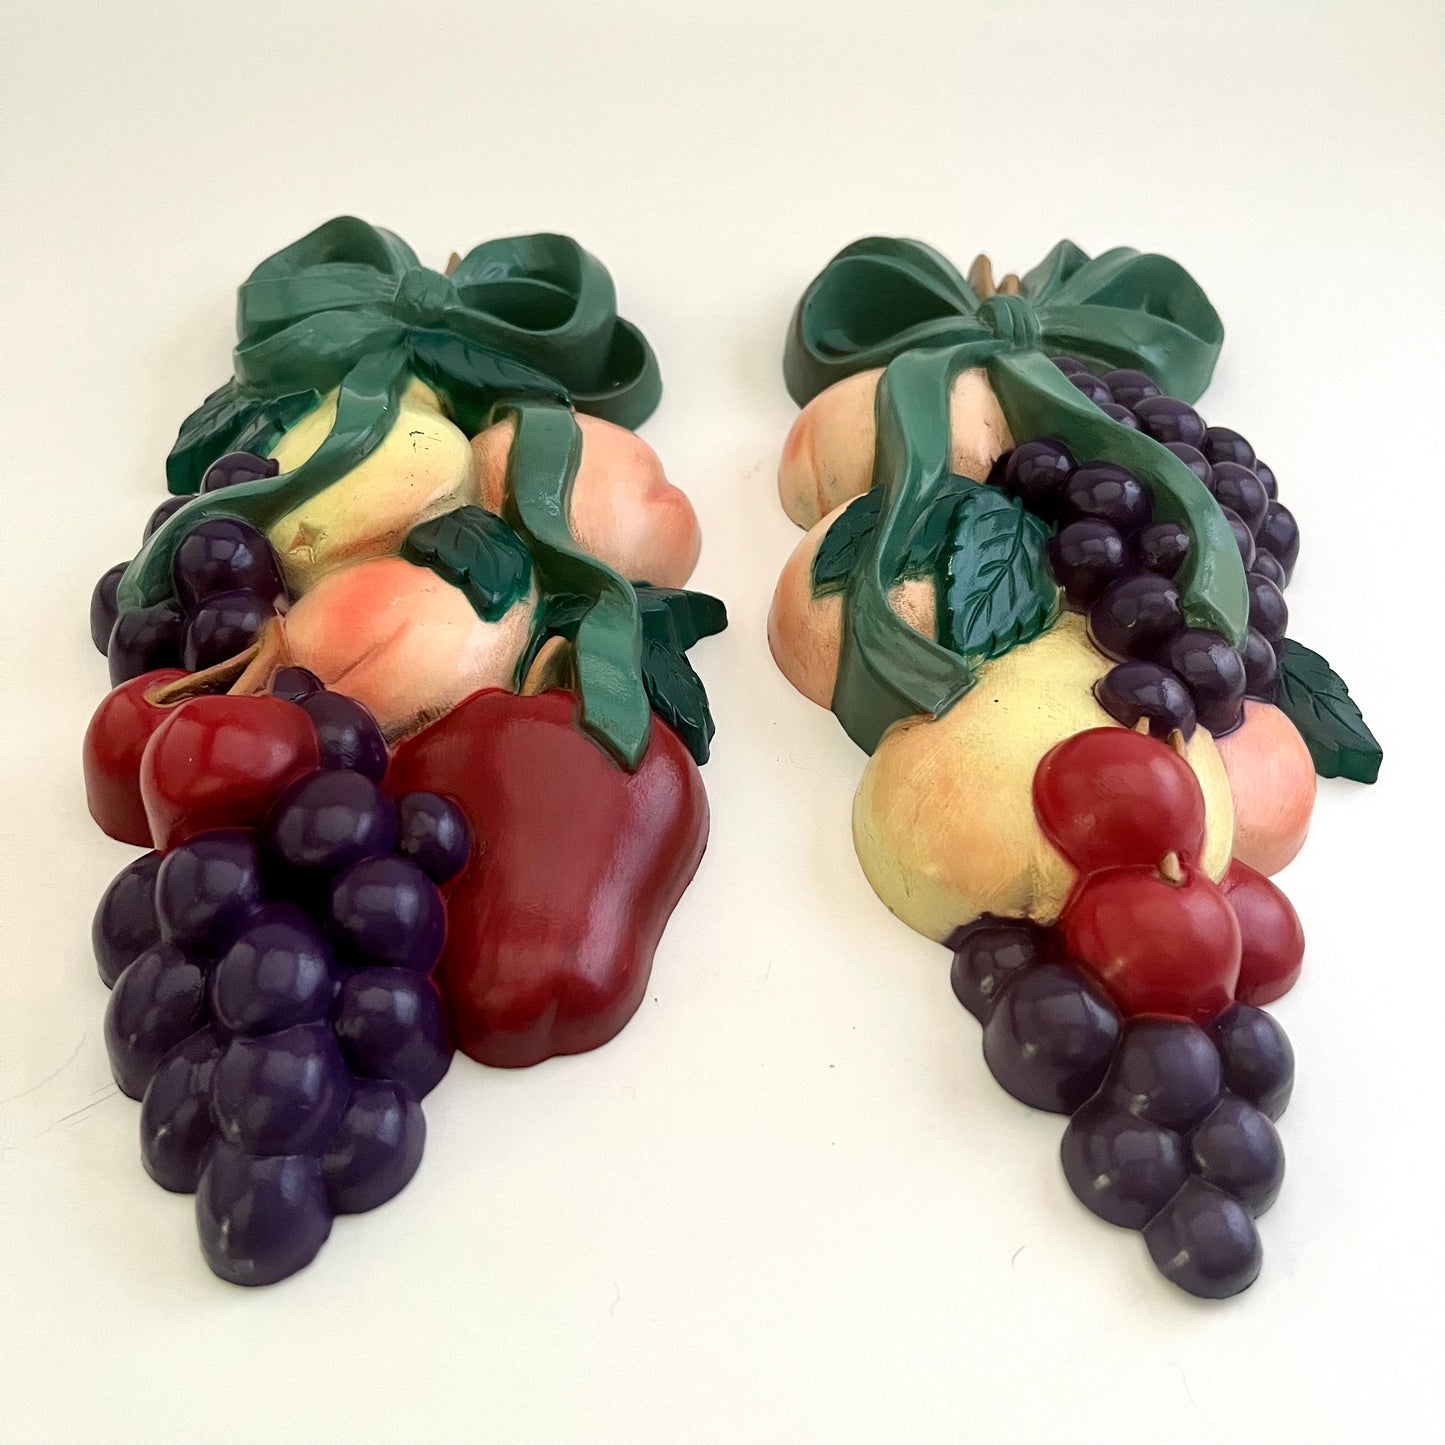 1995 Burwood Fruit Wall Plaques Made by Home Interiors